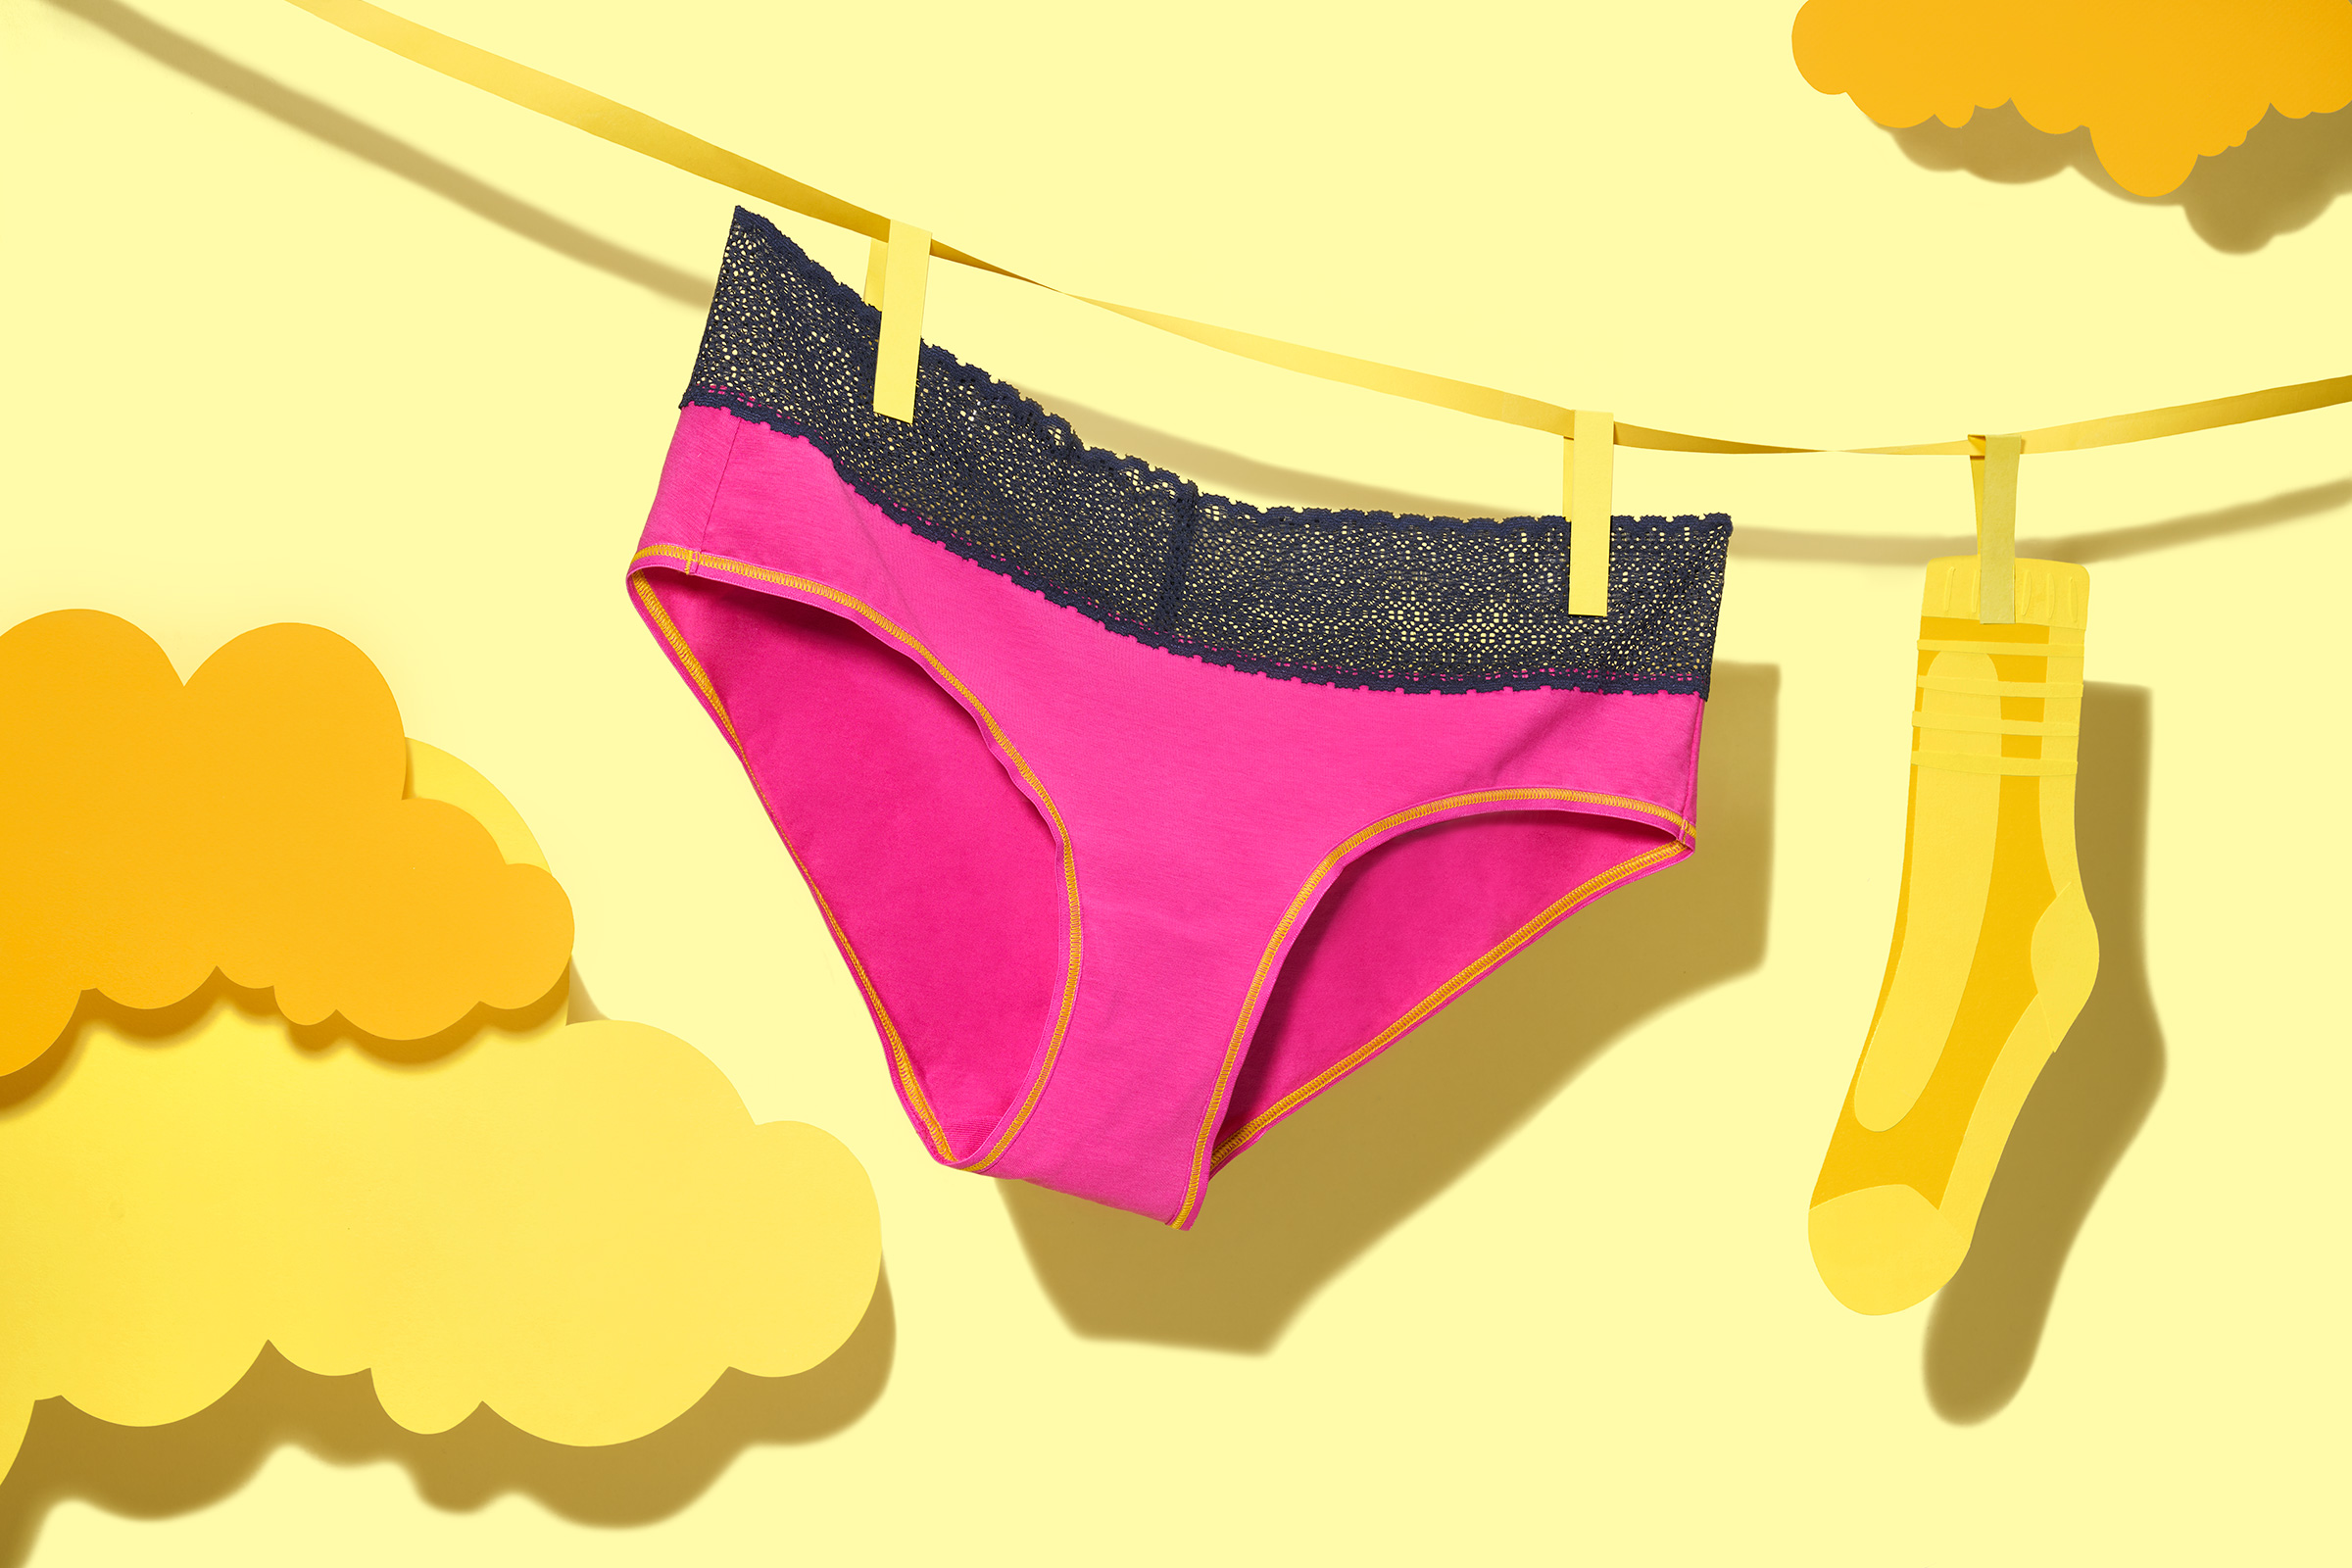 Bombas Adds Underwear Line With Ambitions to be a Multi-Product Brand